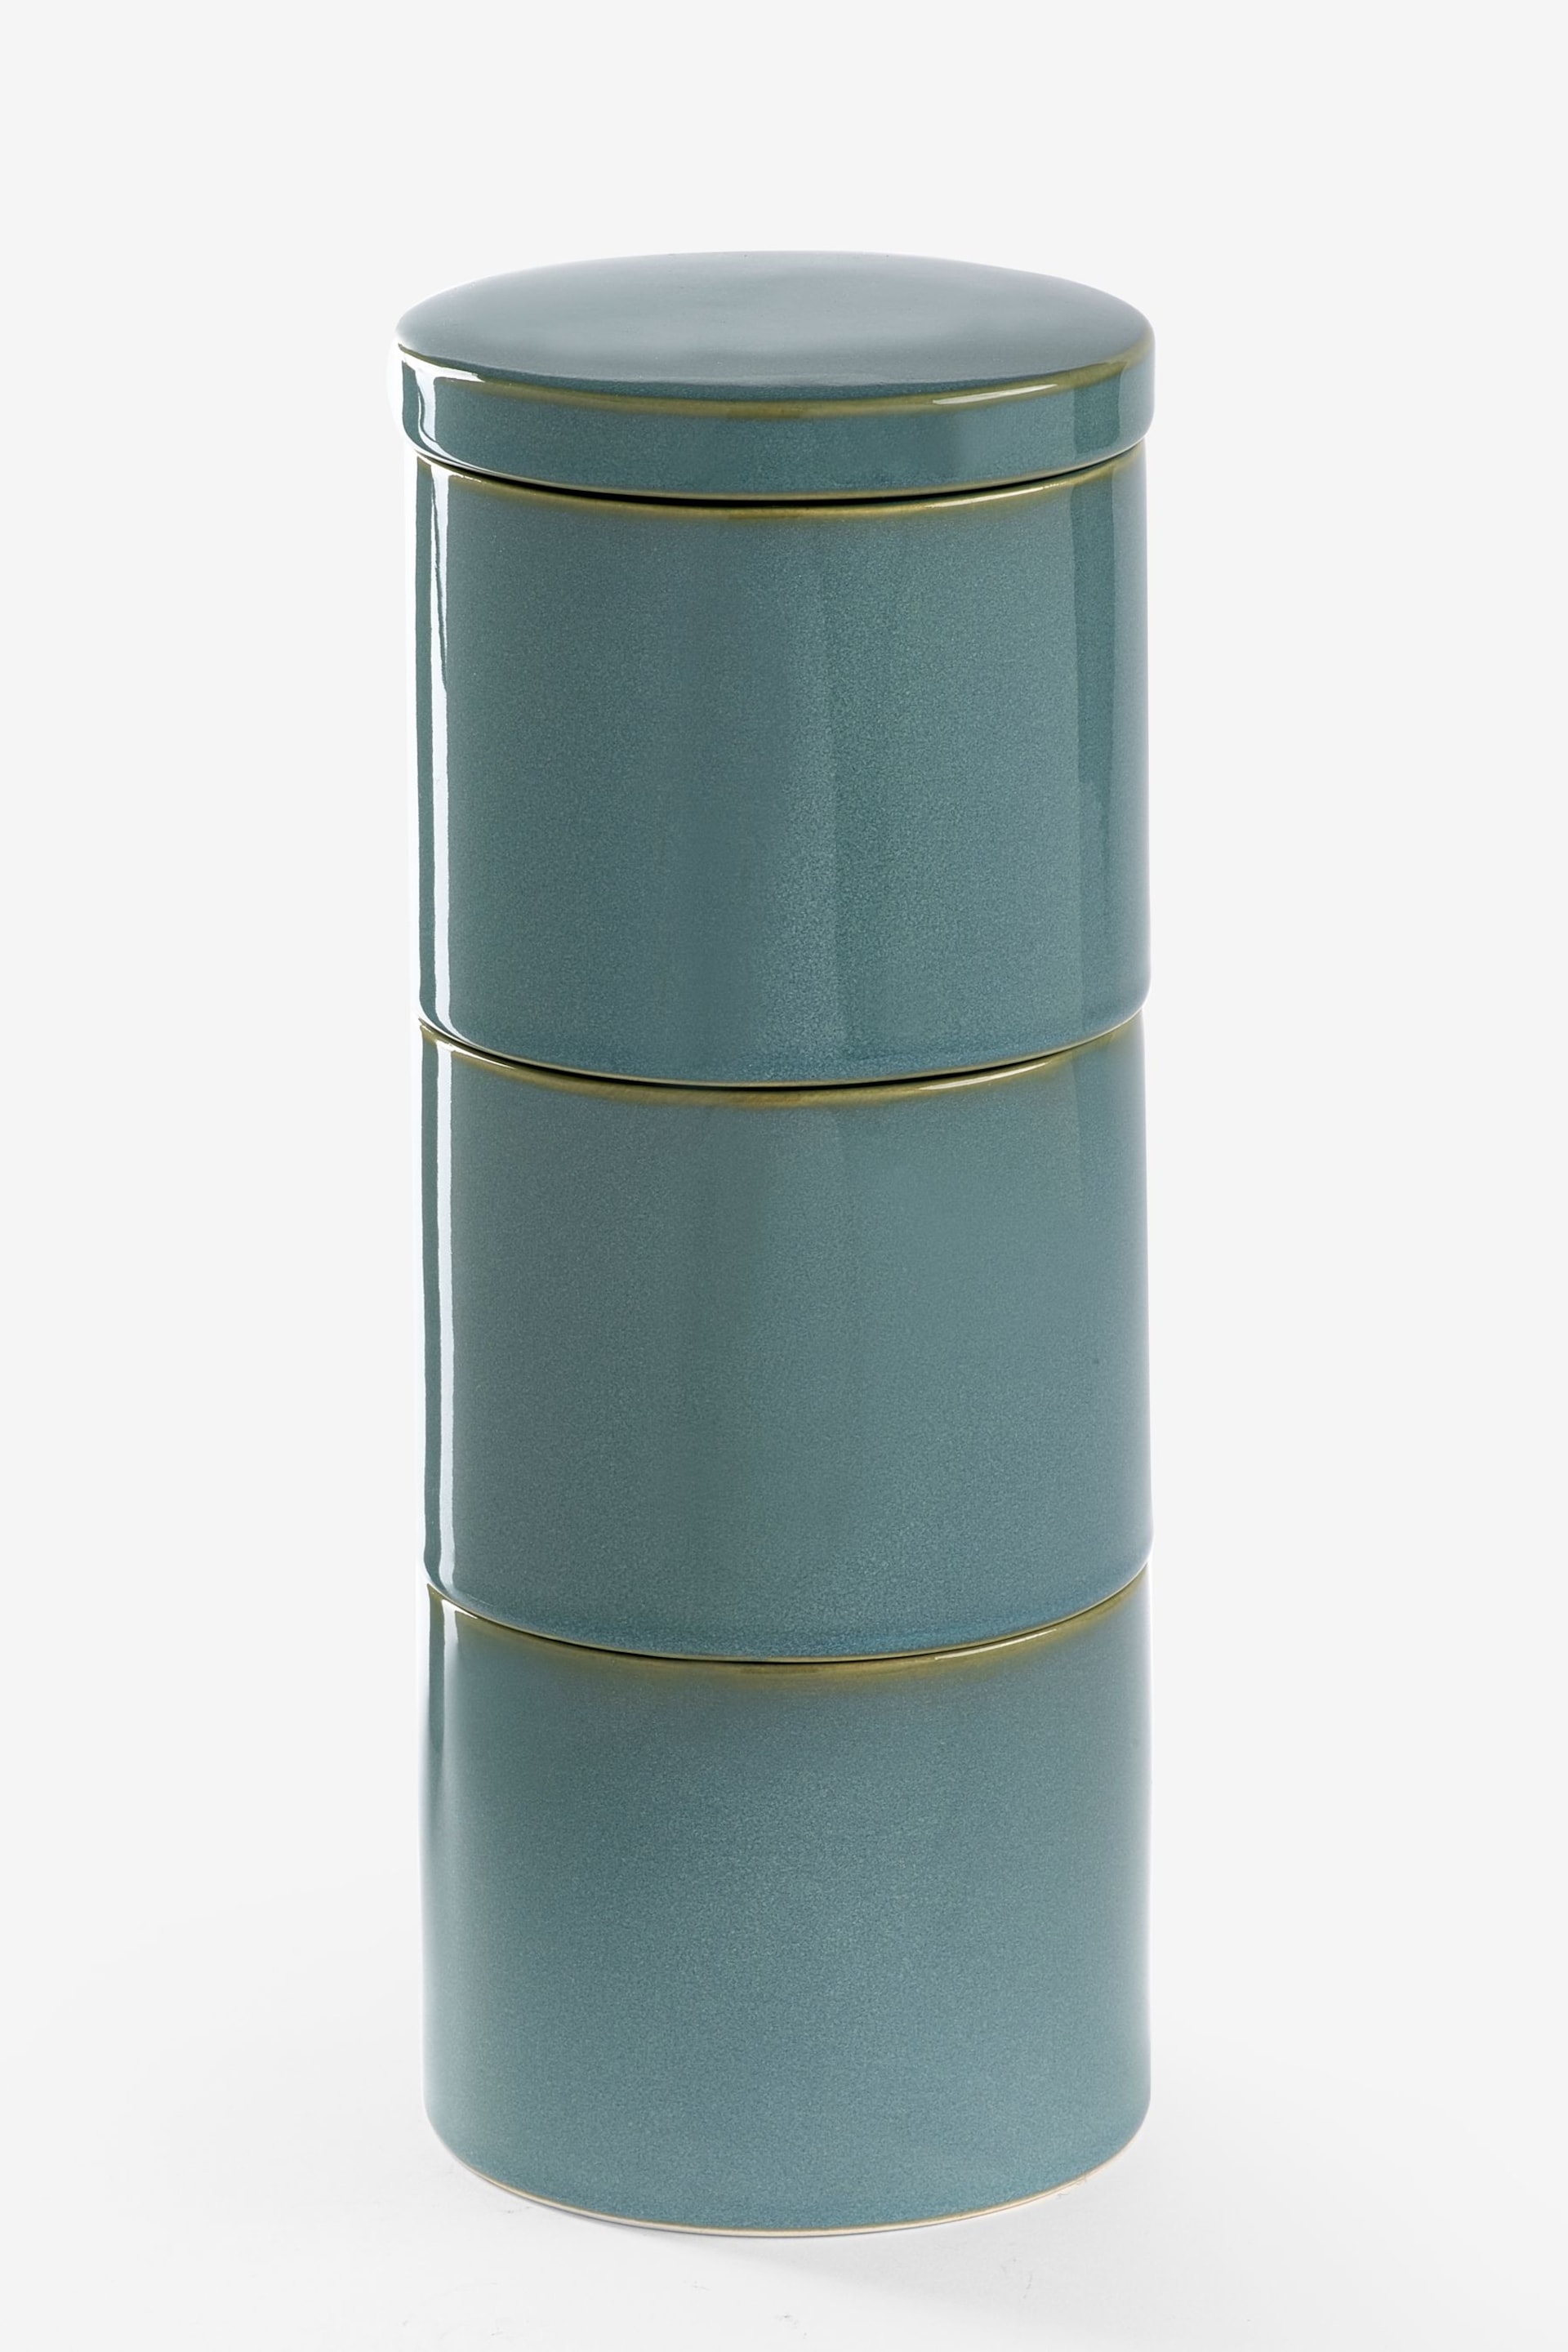 Set of 3 Teal Blue Wolton Stacking Storage - Image 3 of 3